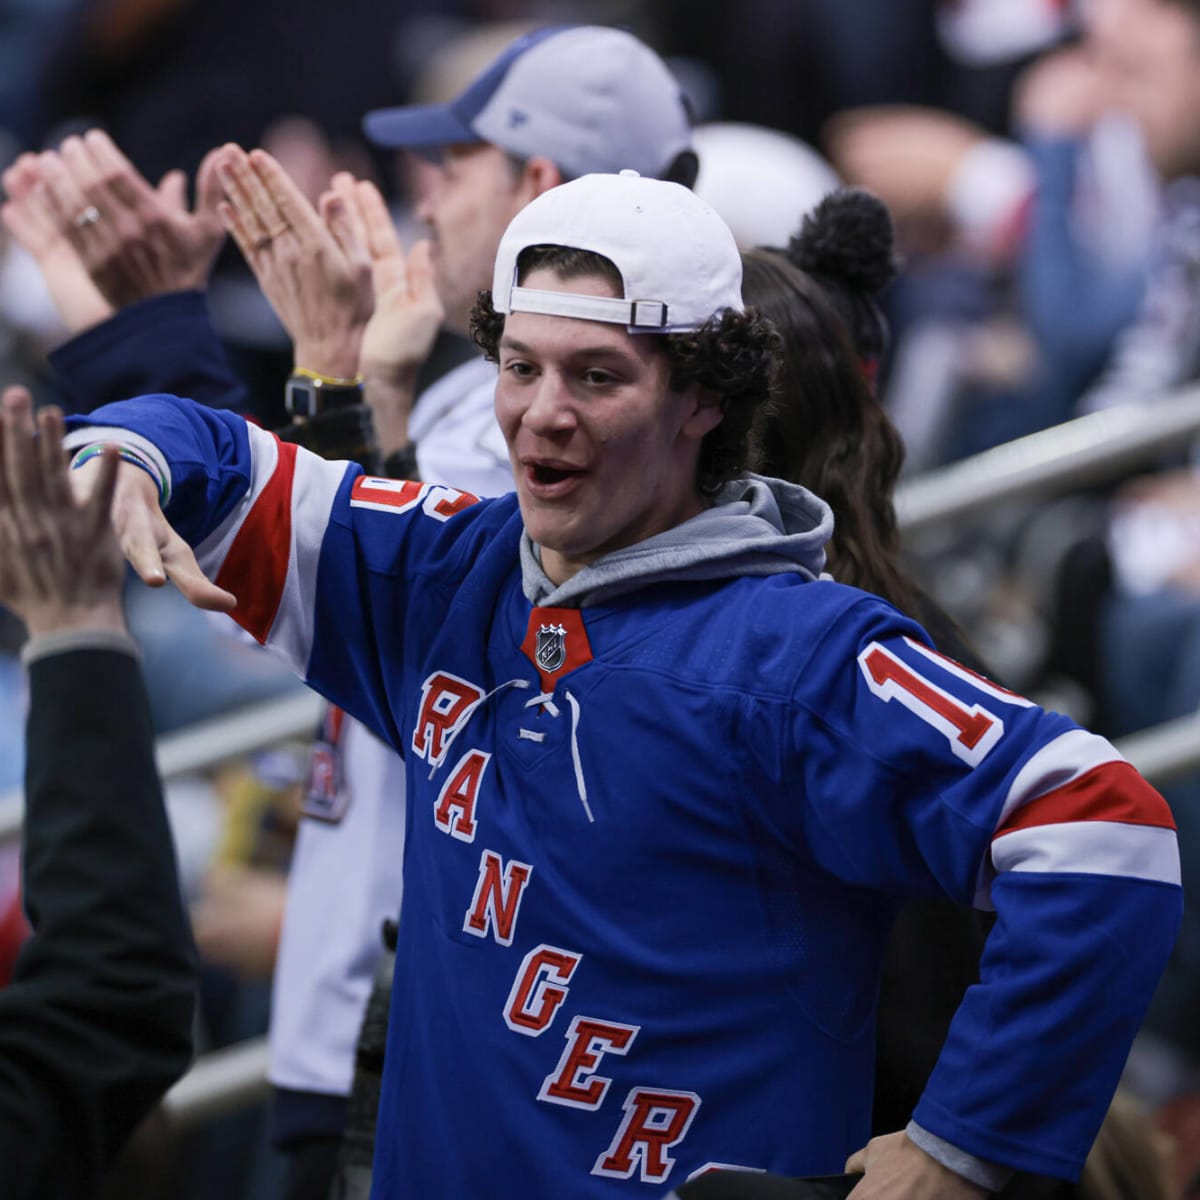 Watch: Rangers fans take over Devils arena, troll fans with chant